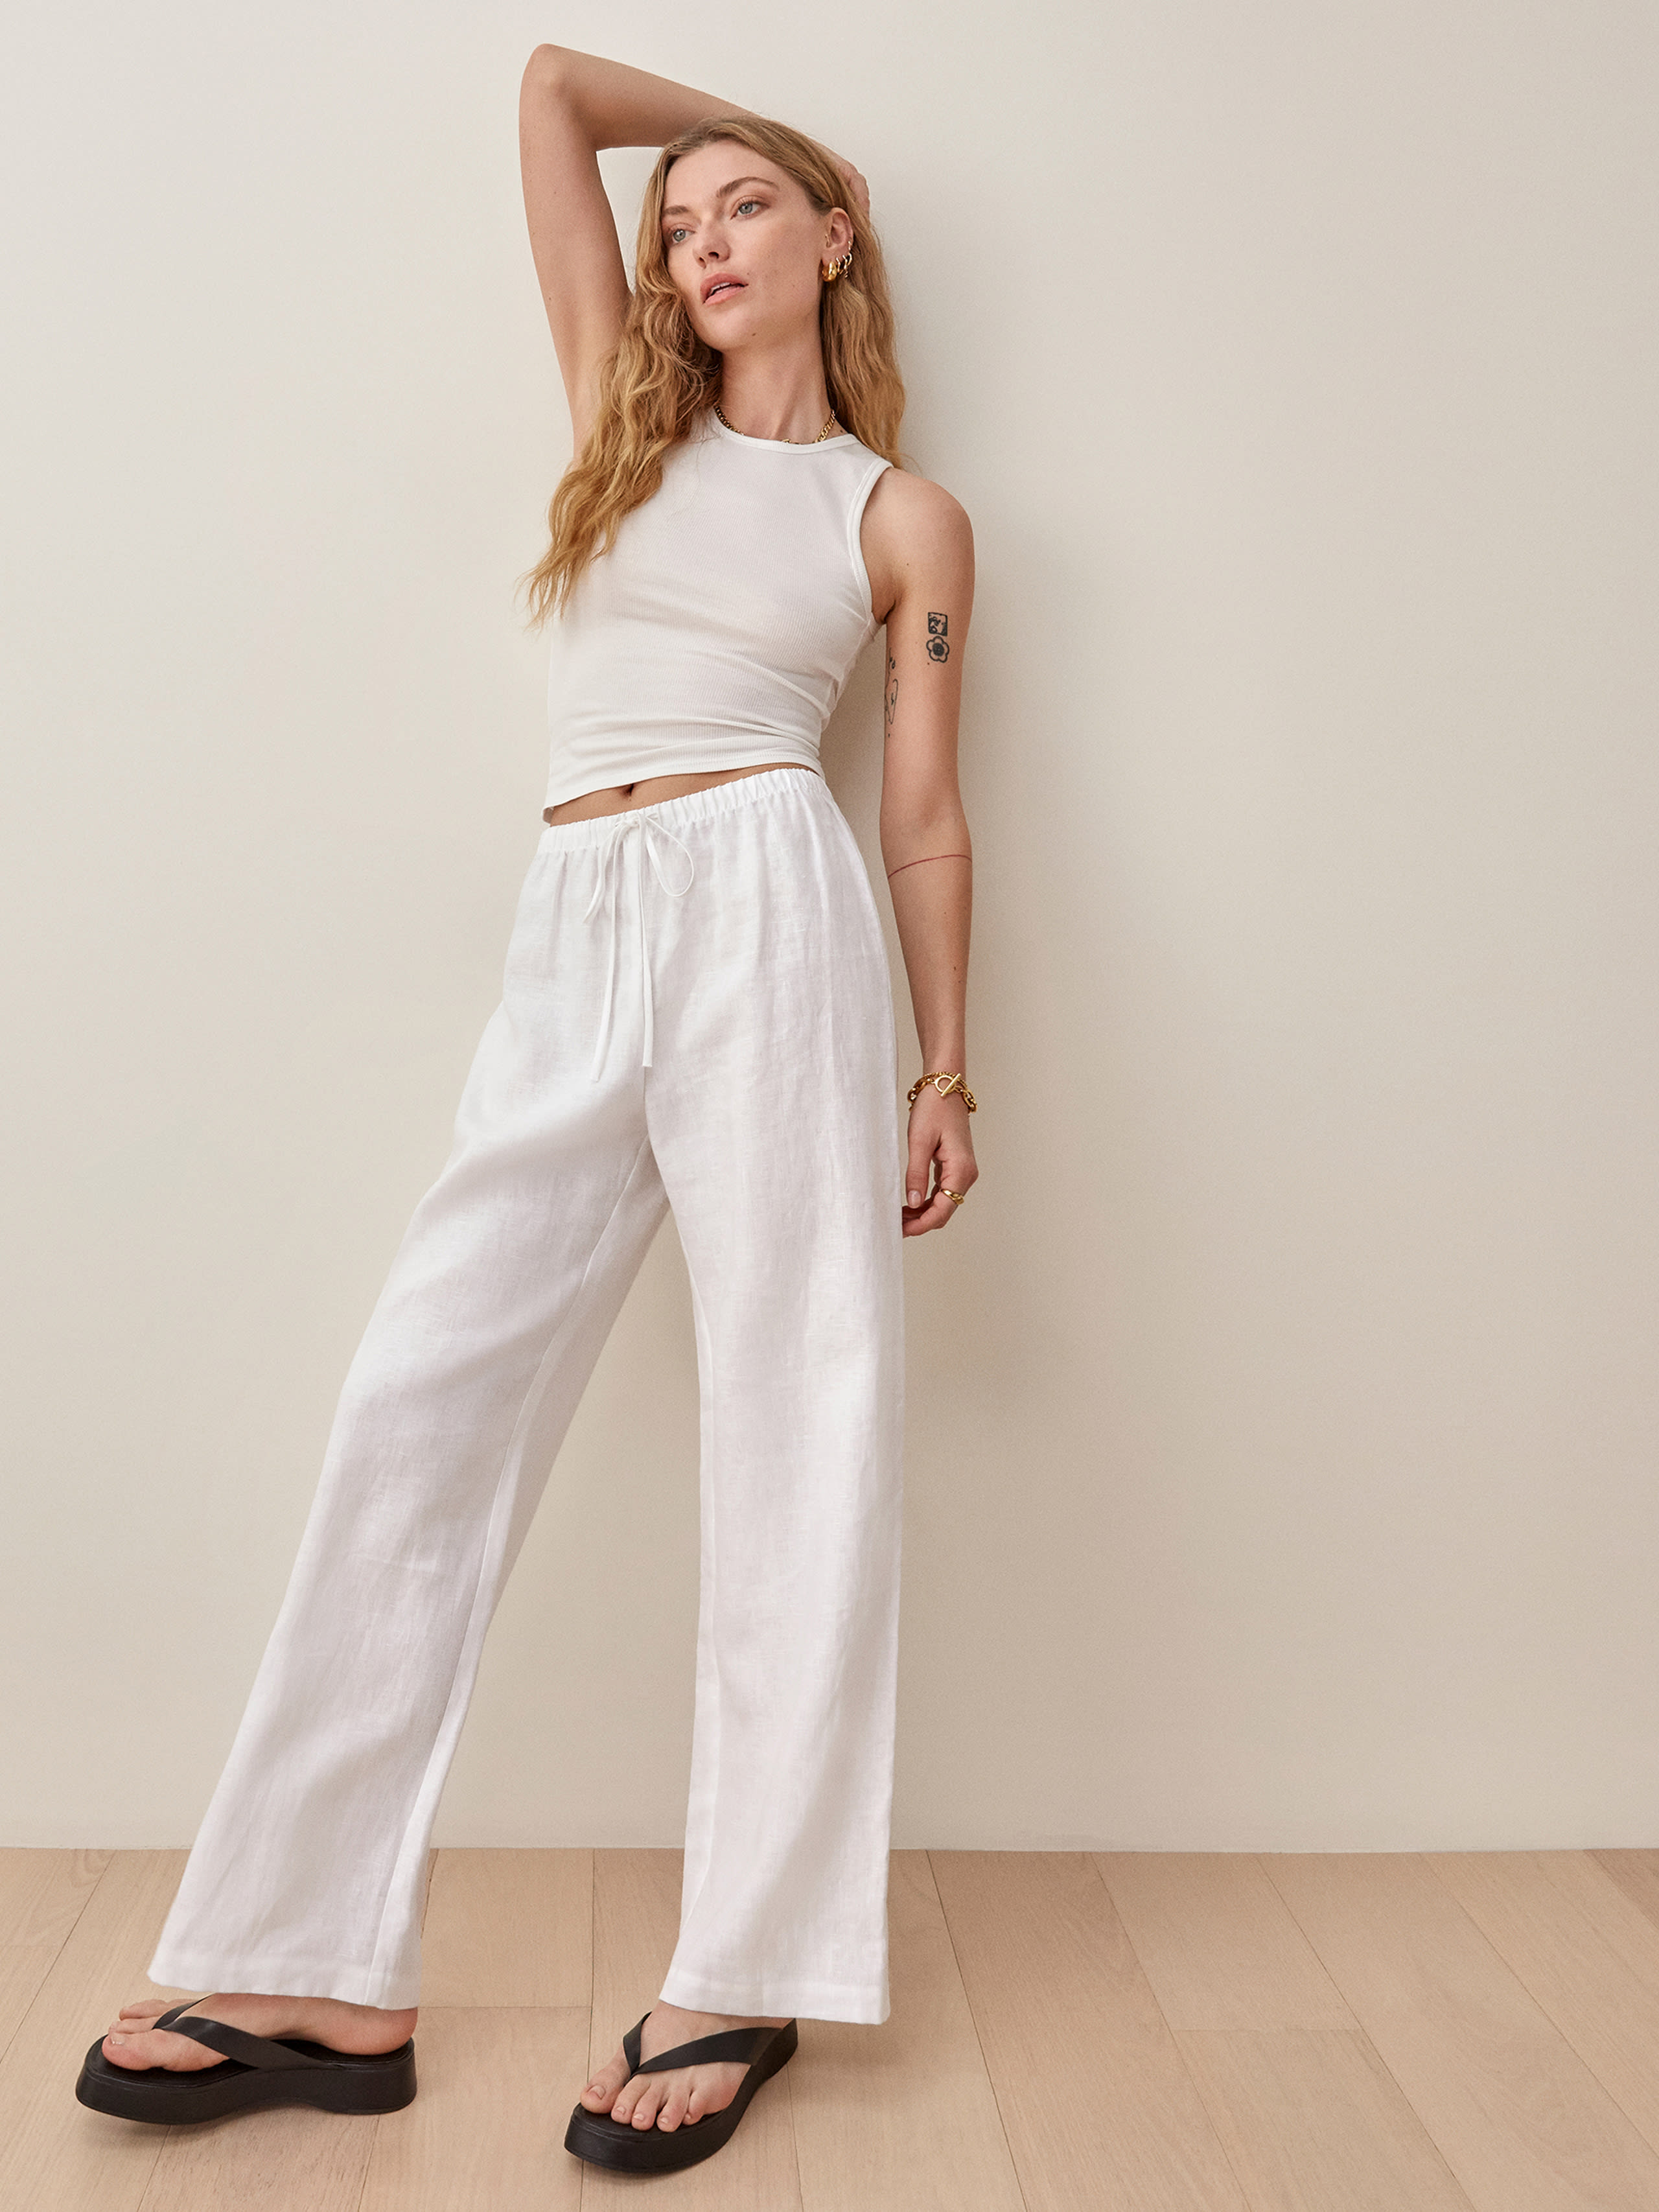 Reformation Petites Olina Linen Pant In White